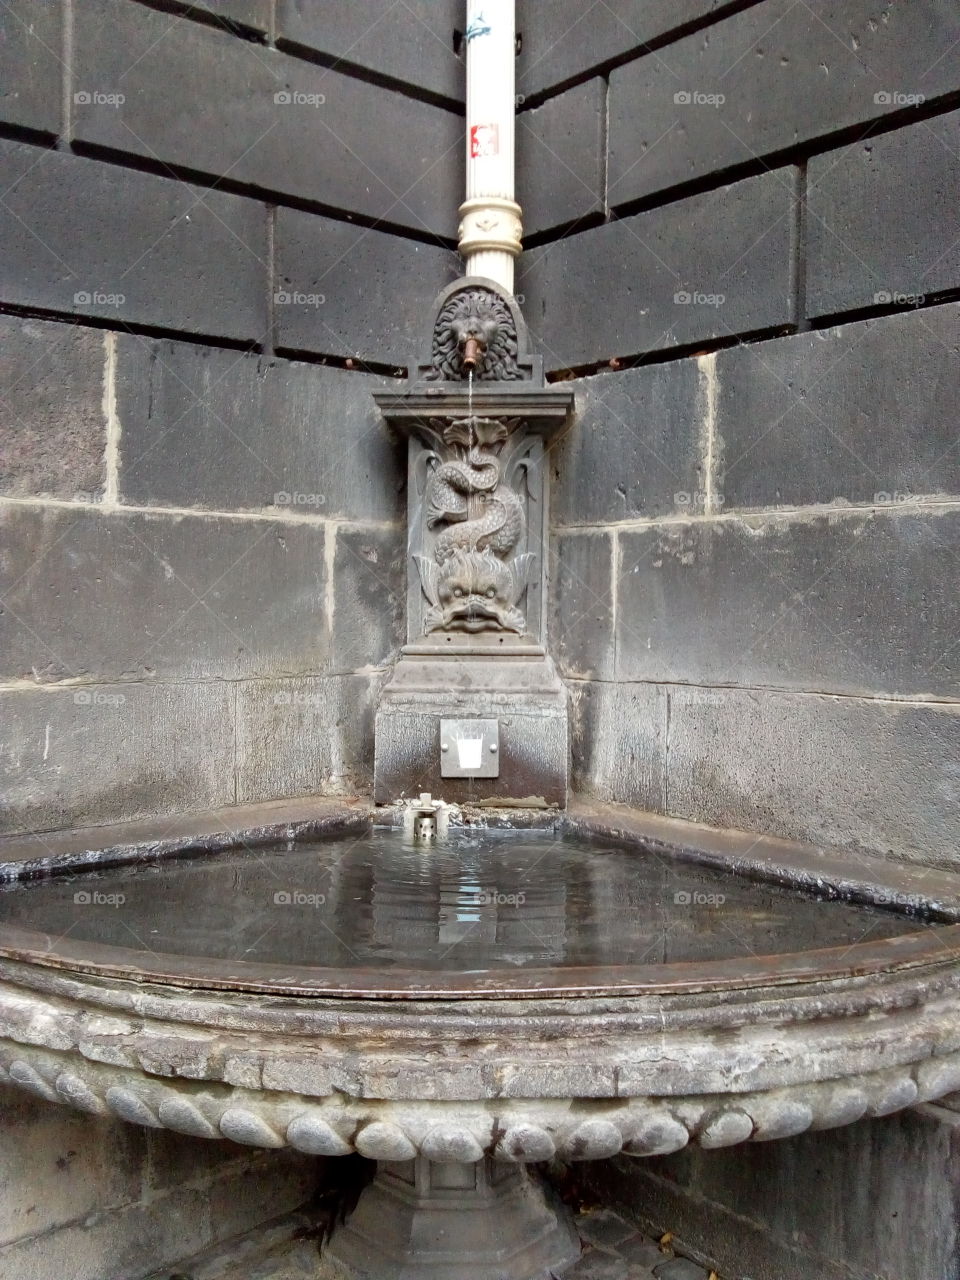 One of many small fountains downtown in Clermont-Ferrand, Auvergne, France